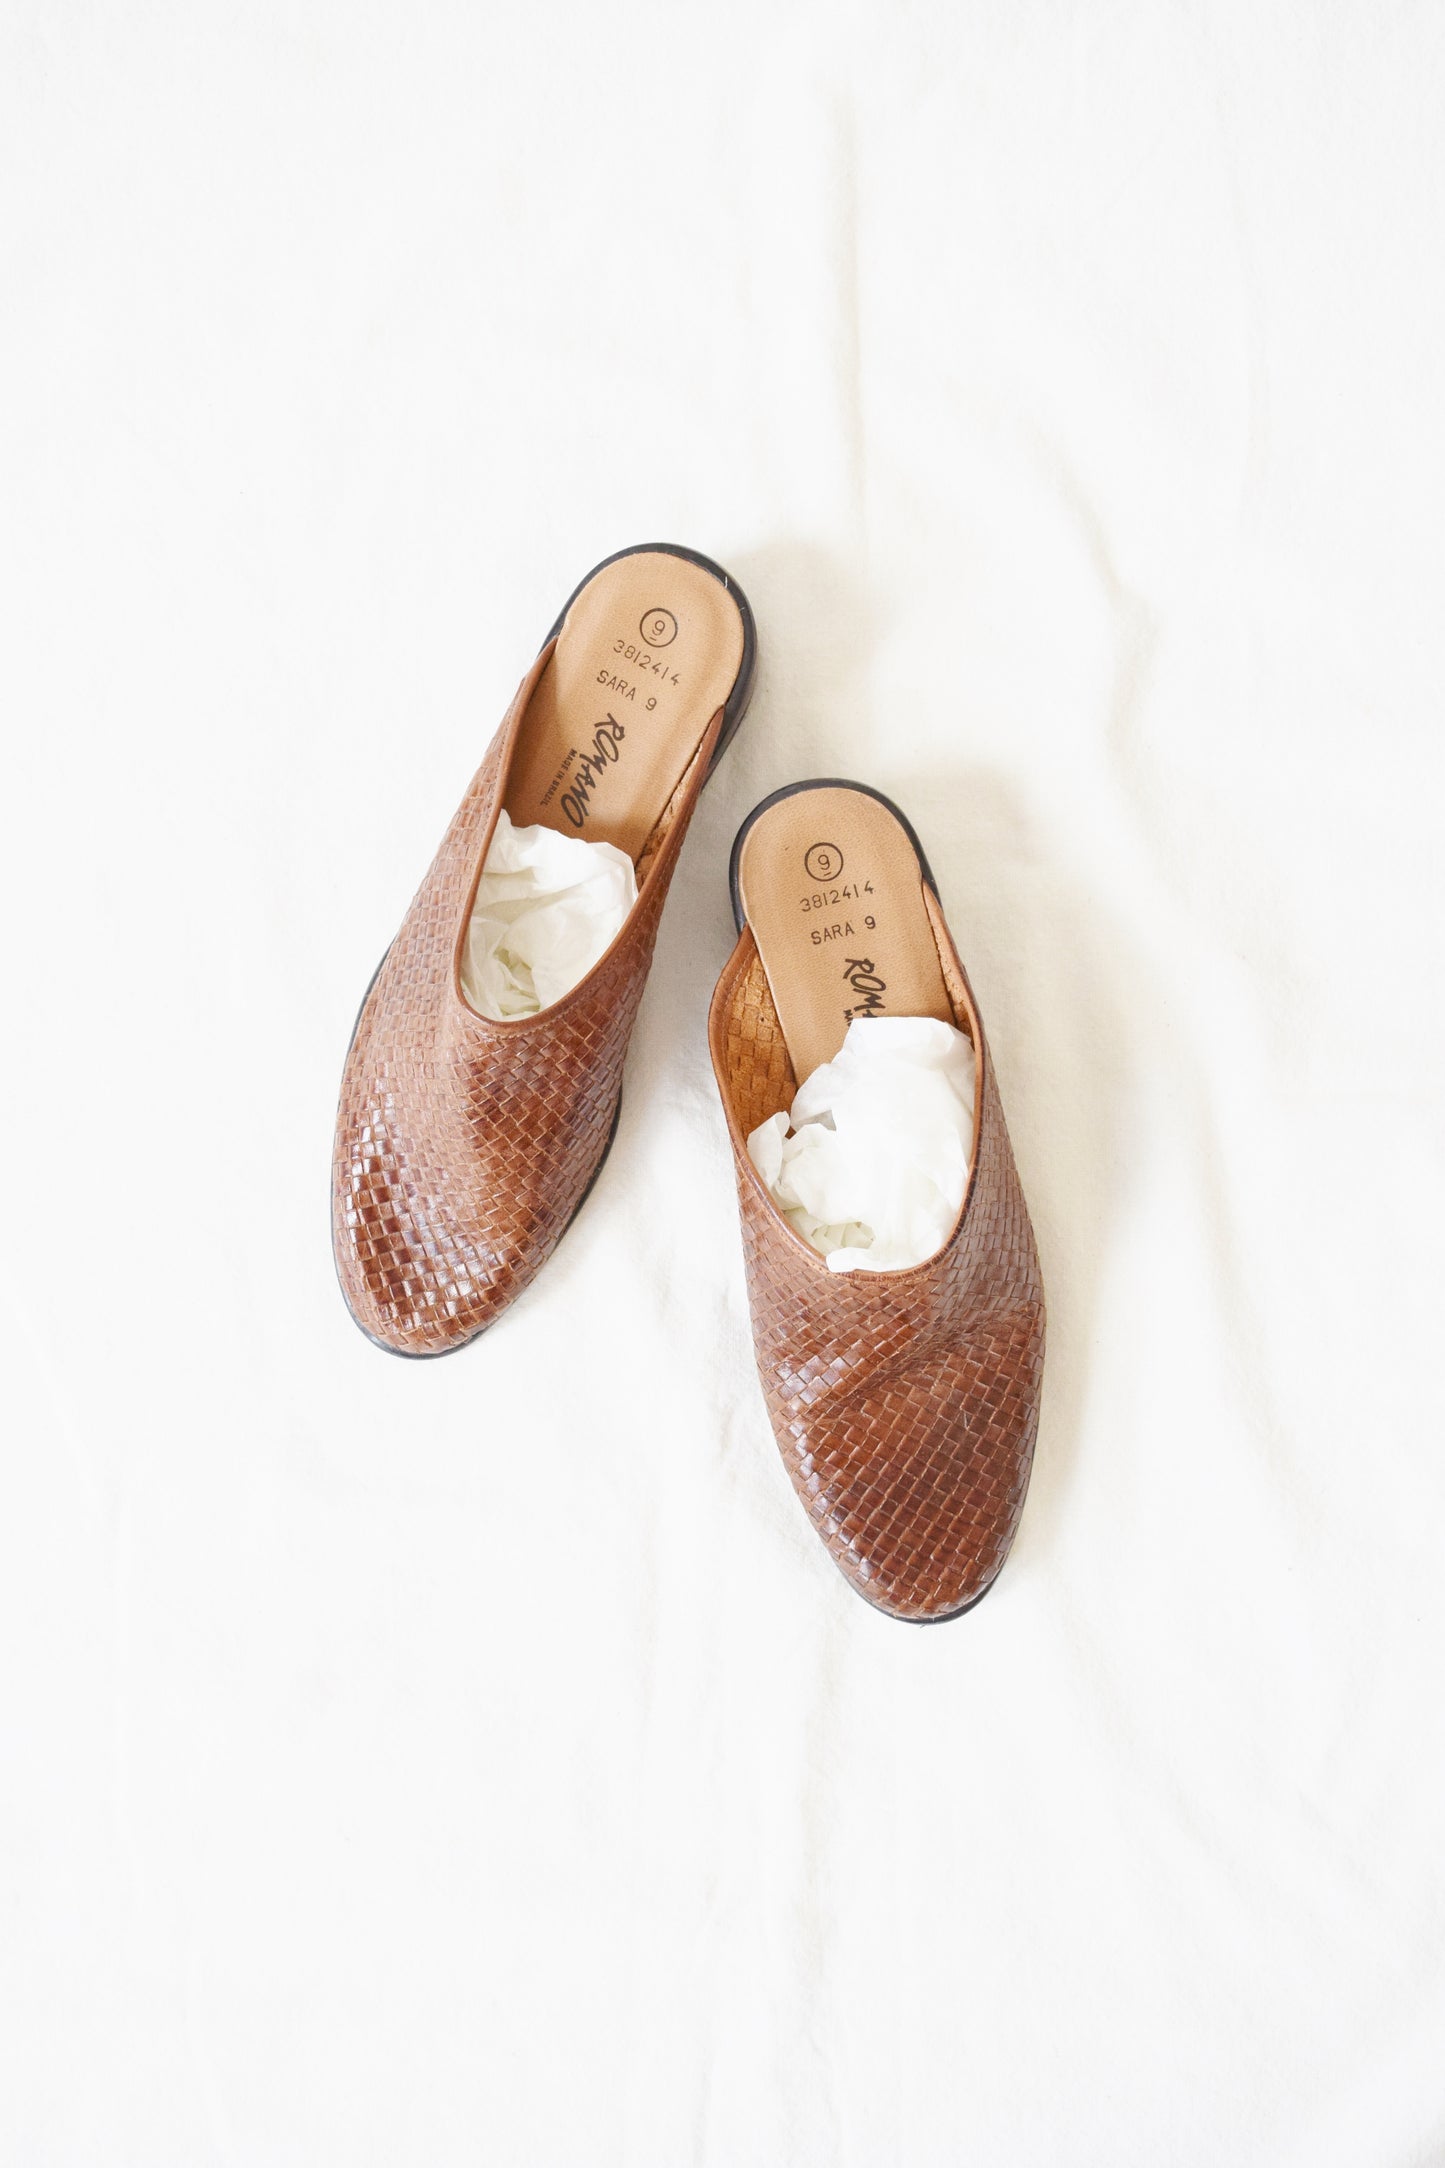 Vintage Woven Leather Mules | 1990s Mules | US 9 EU 40